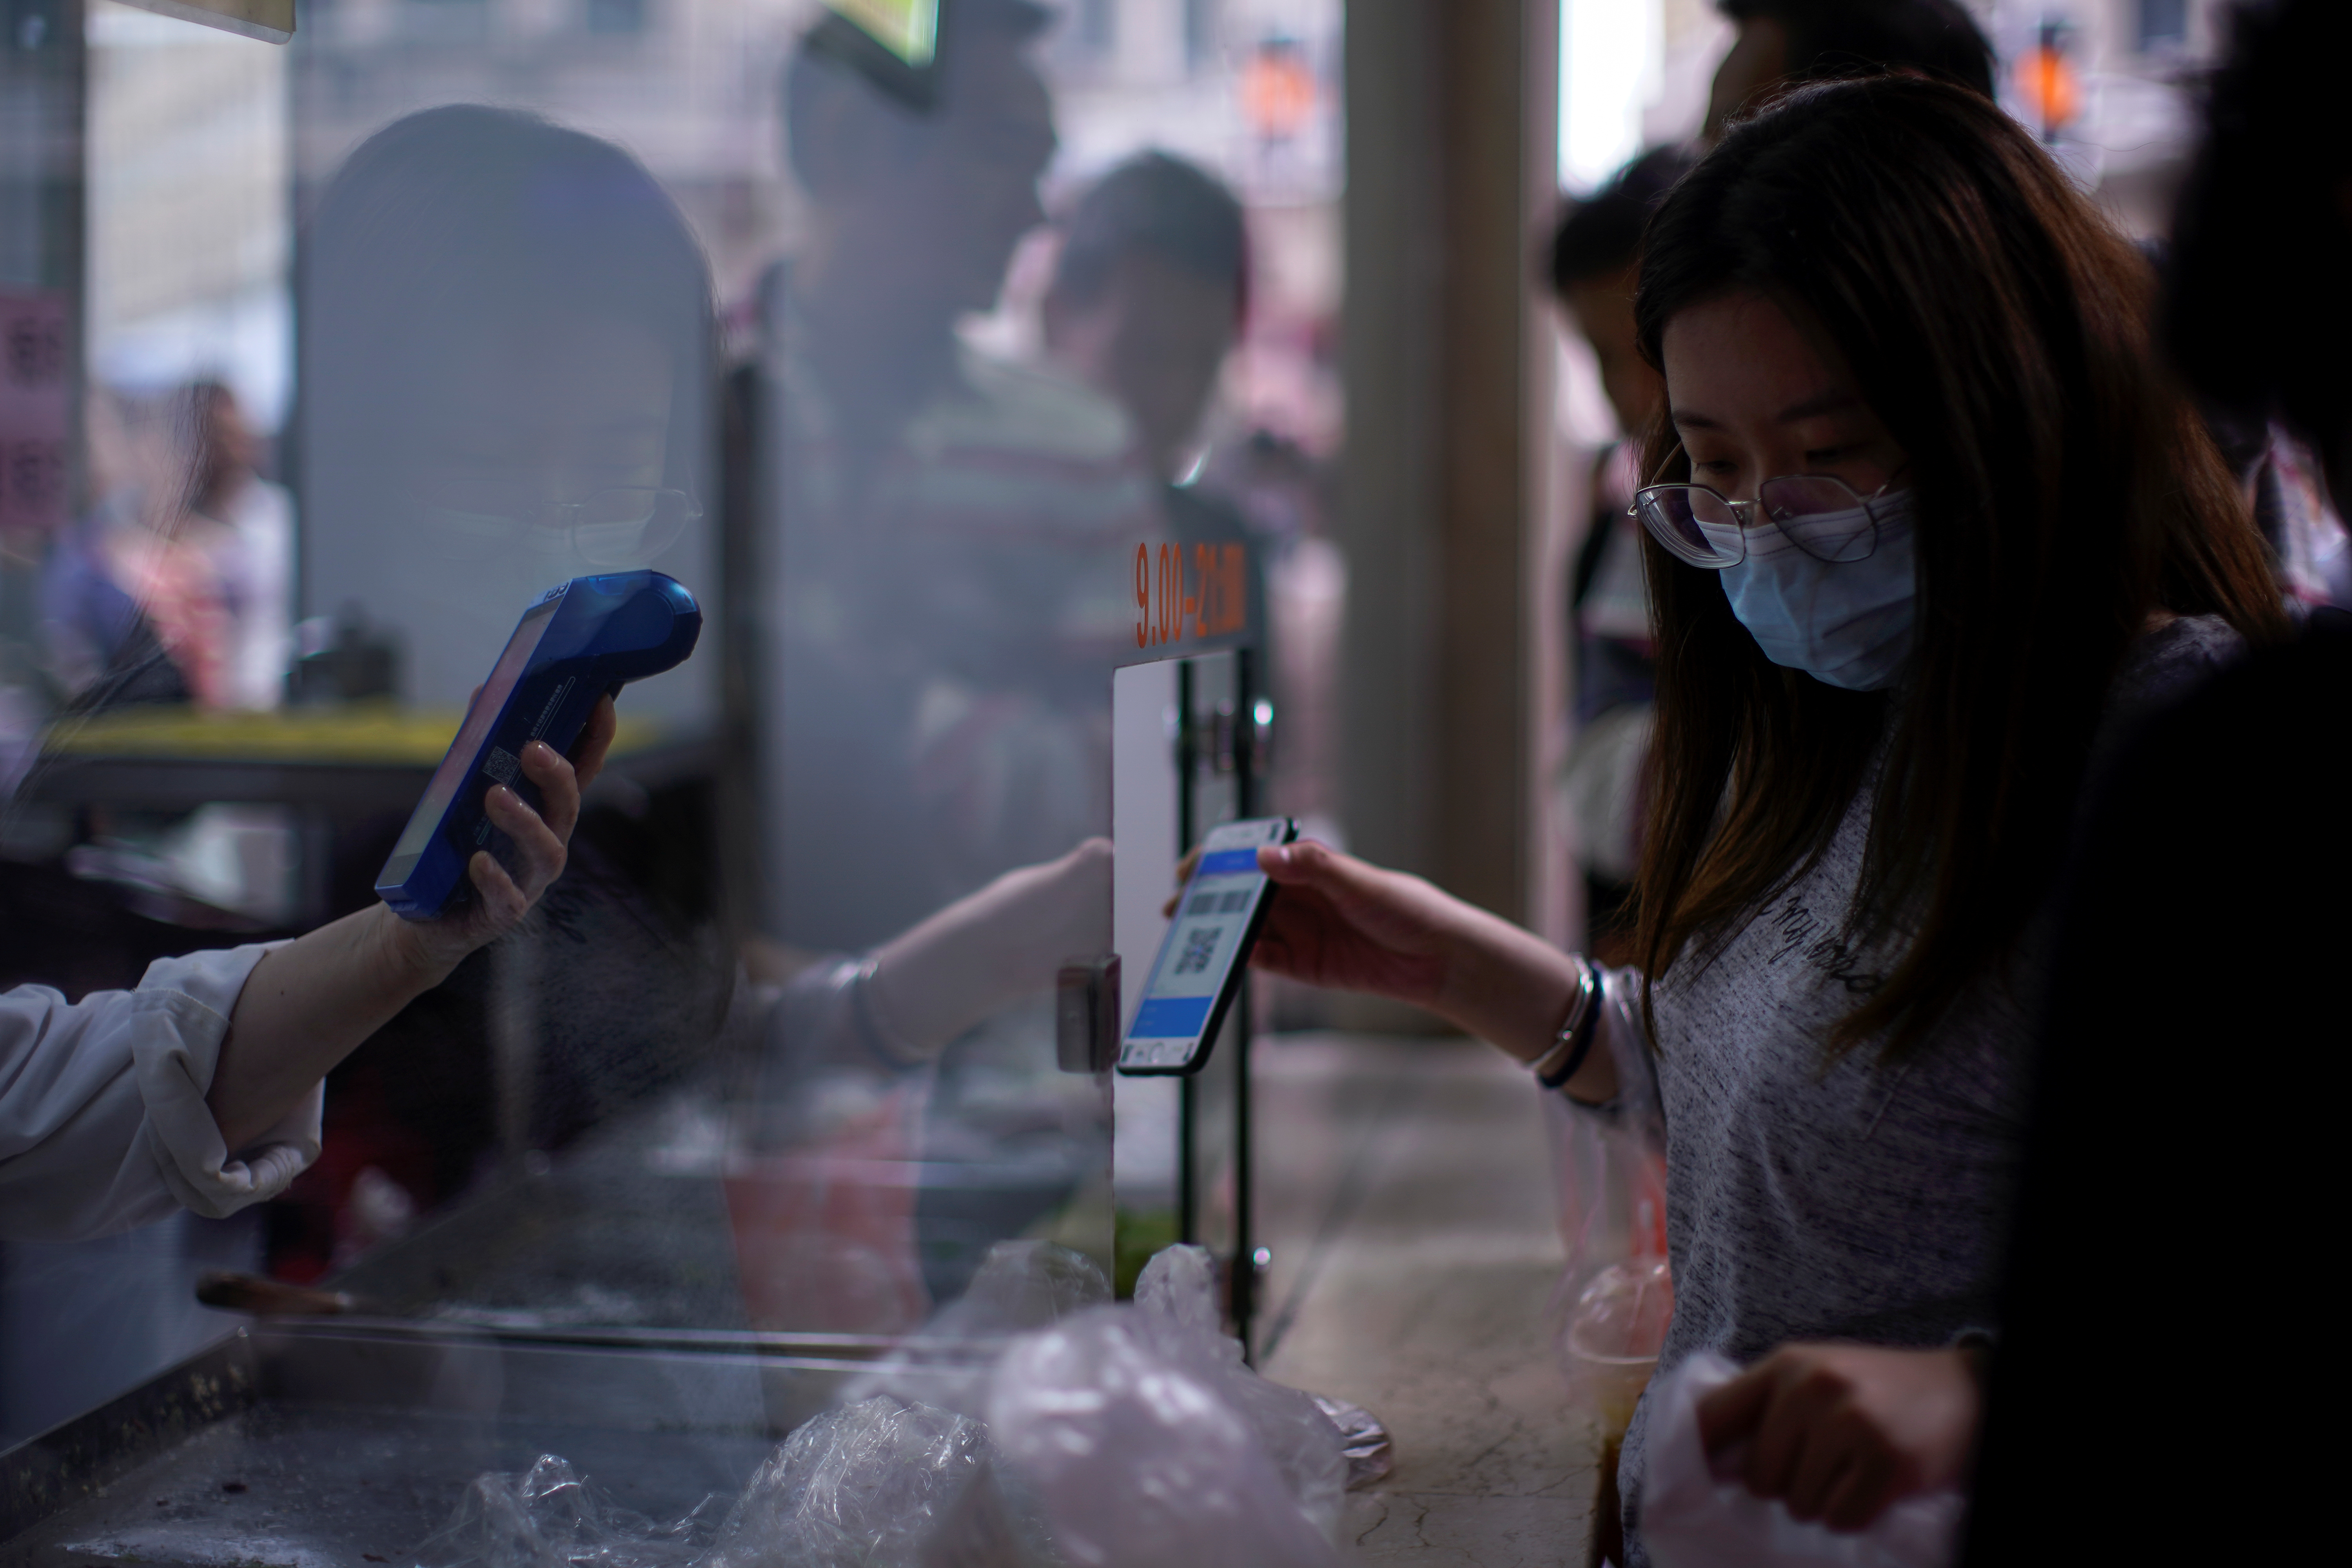 A woman gets her phone's QR code of the digital payment services scanned at a food shop, following the coronavirus disease (COVID-19) outbreak, in Shanghai, China October 10, 2020. REUTERS/Aly Song